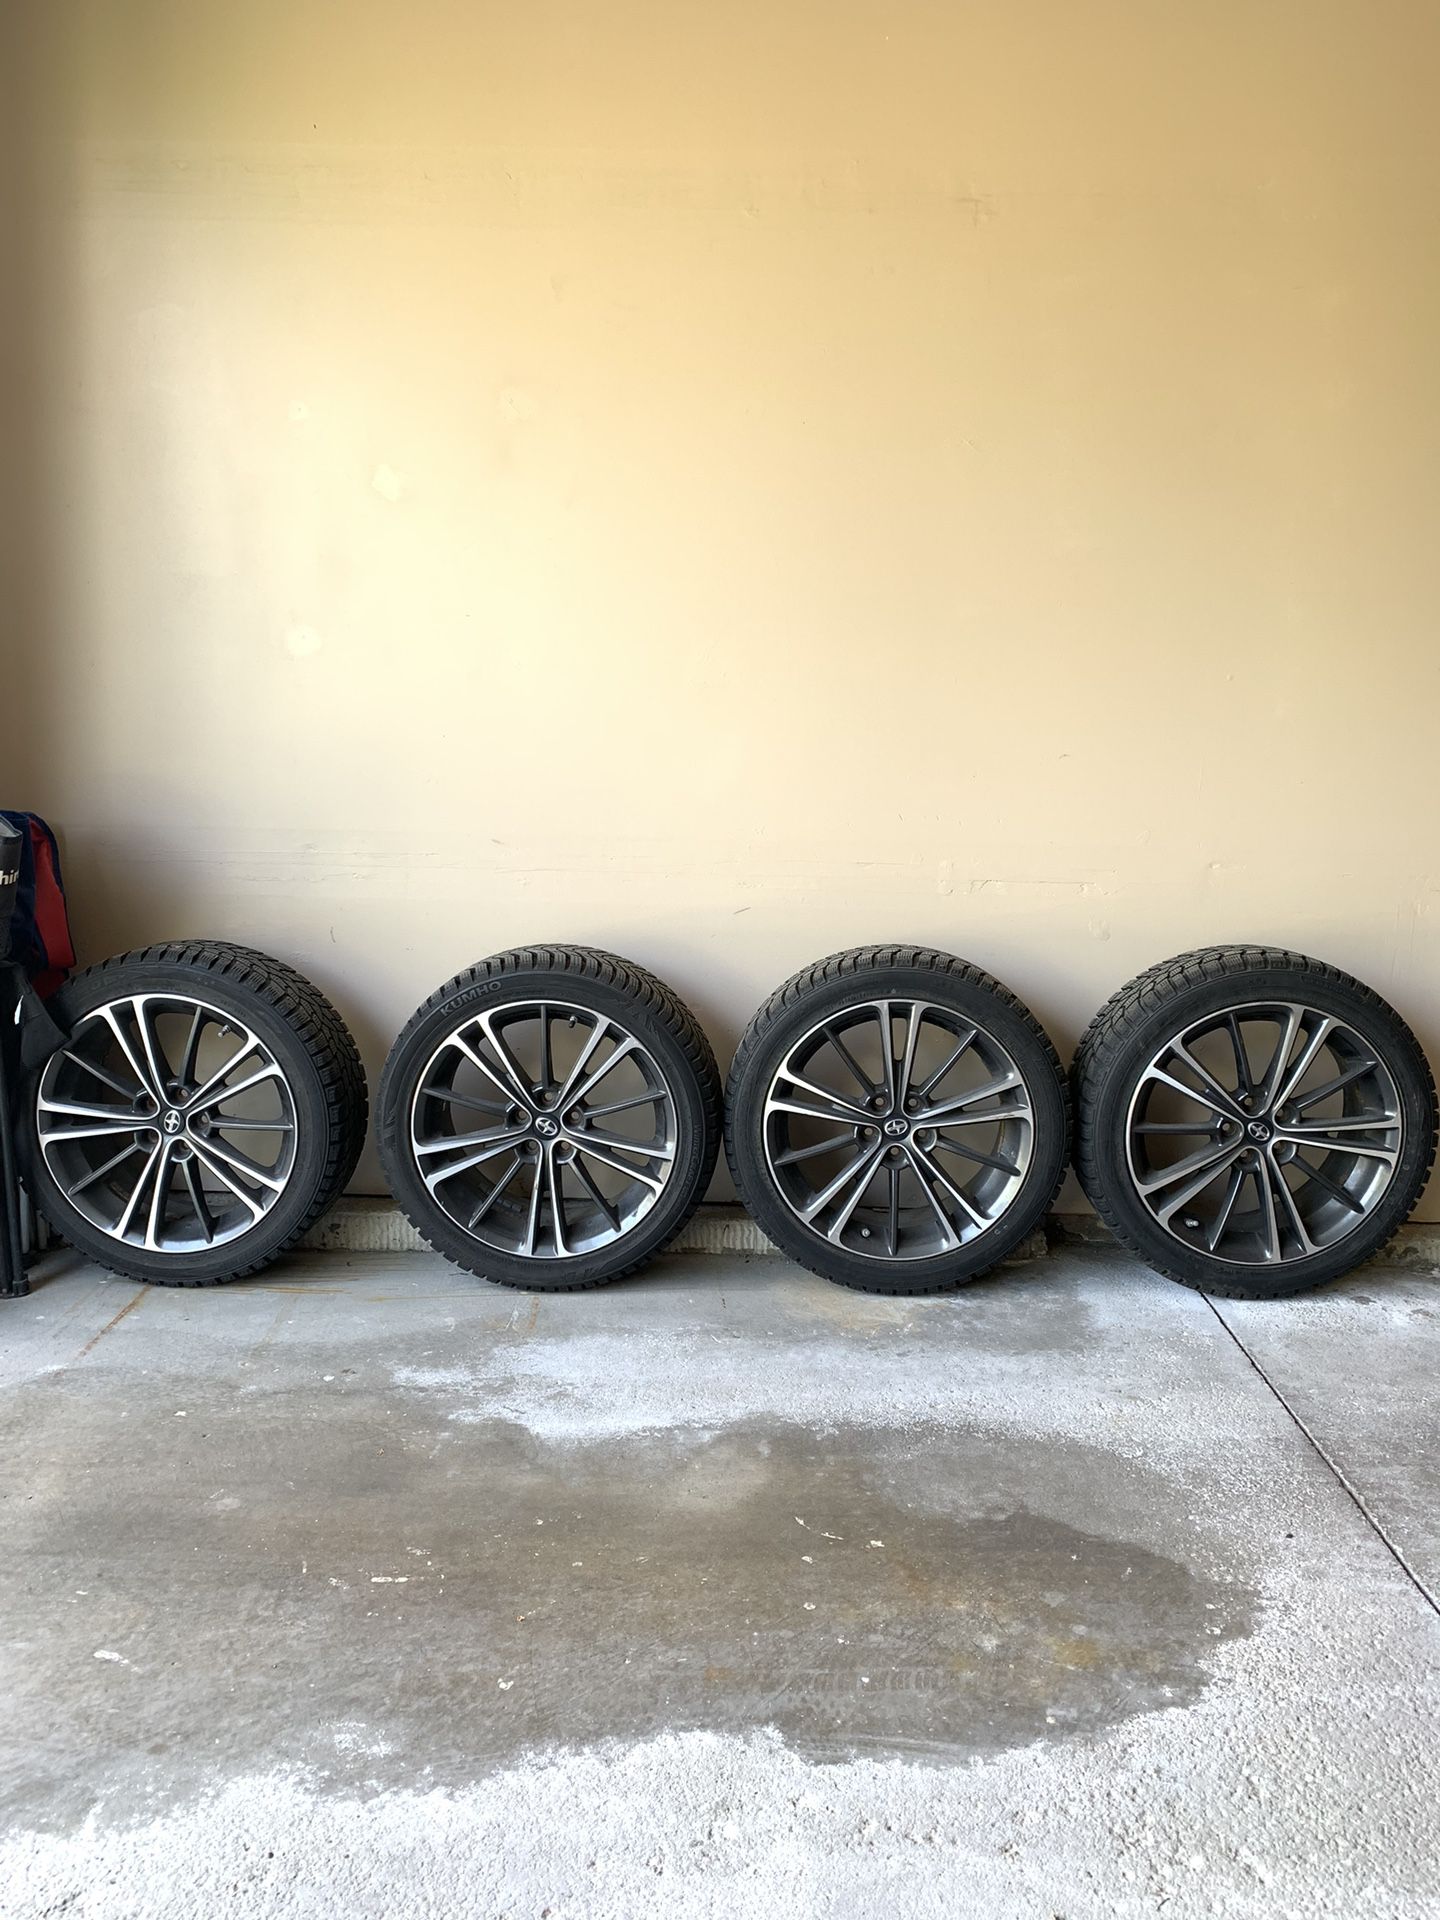 Frs/brz/86 Stock Wheels and Winter Tires